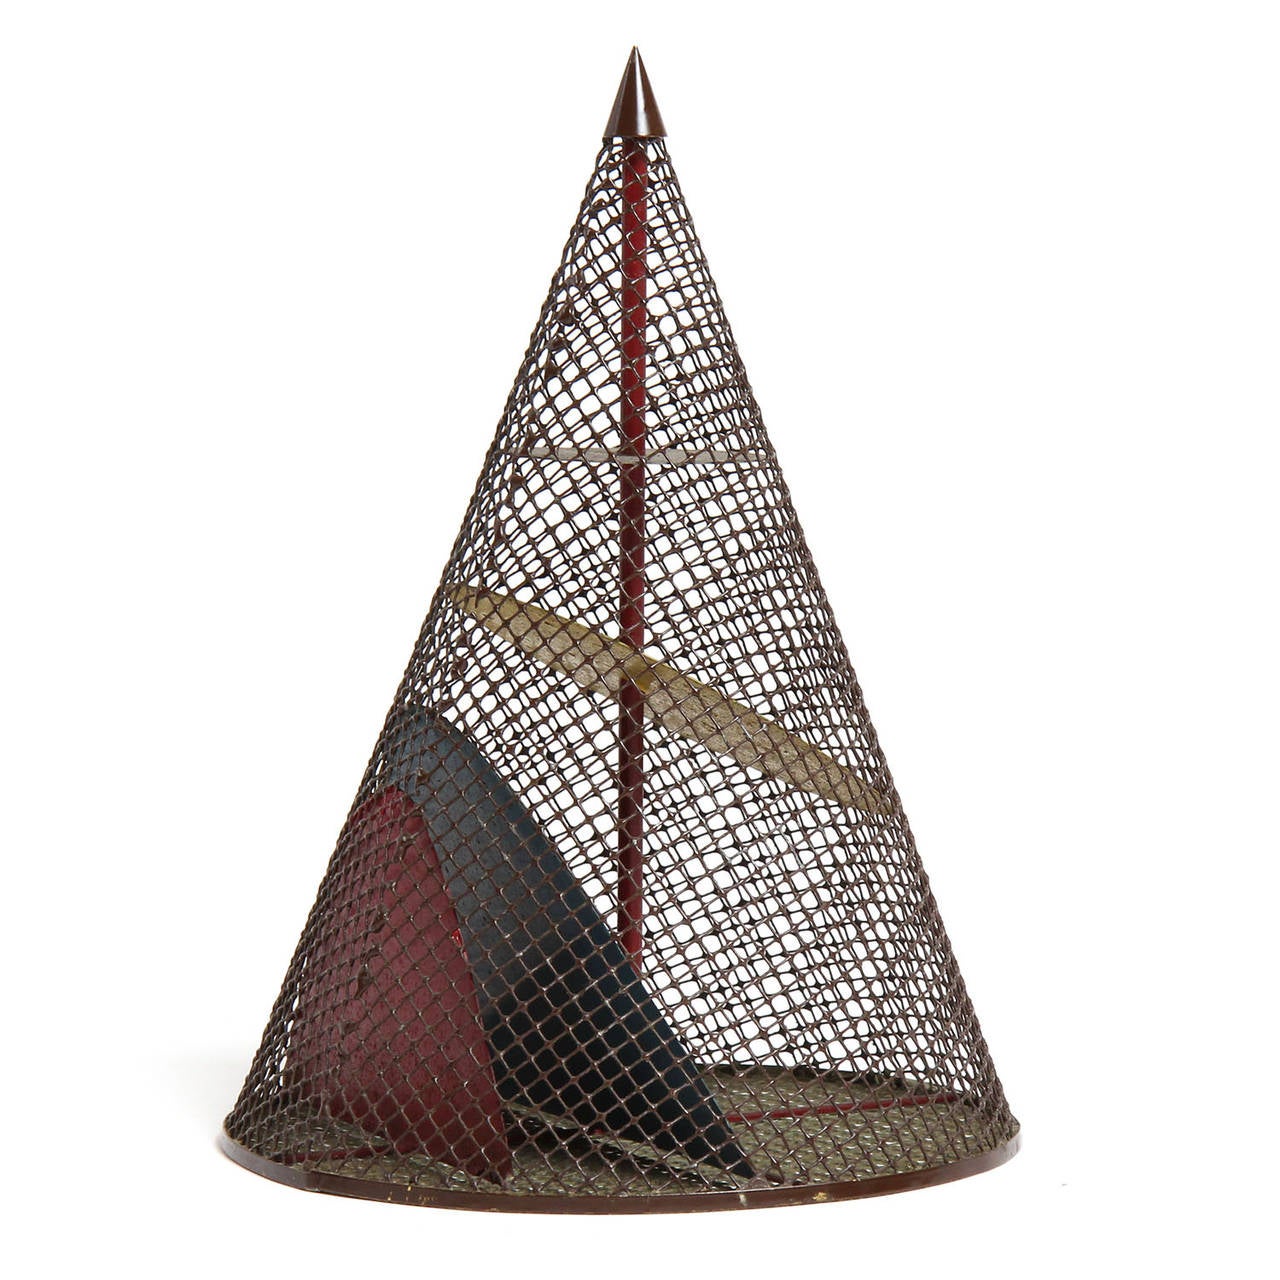 An expressive and finely rendered unique metal sculpture having a conical wire-wrapped form with organic painted shapes encased in the interior.